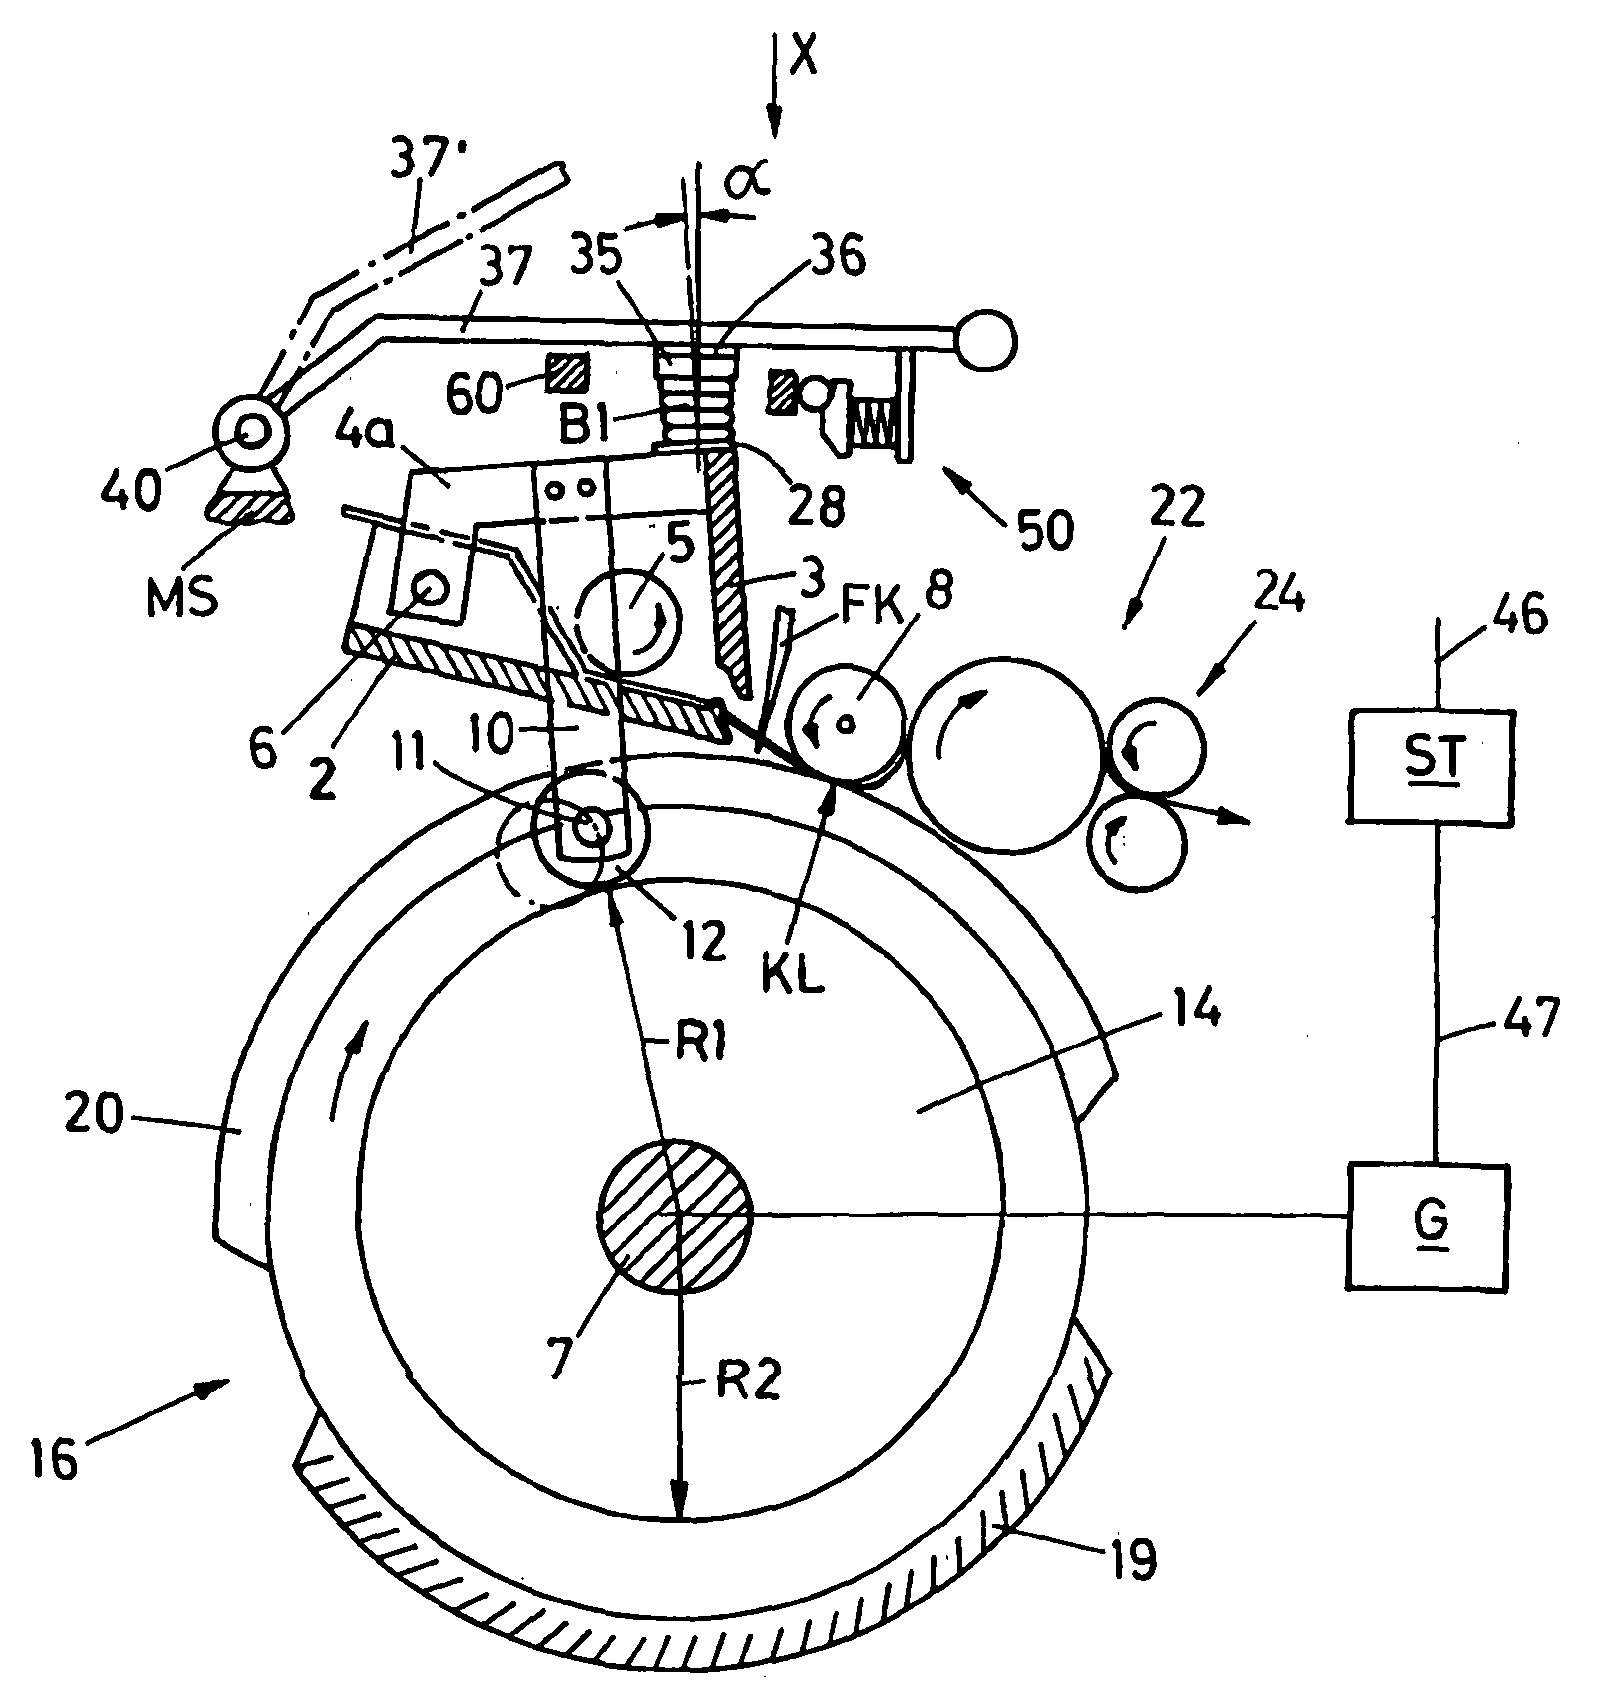 Combing device for combing fibrous material